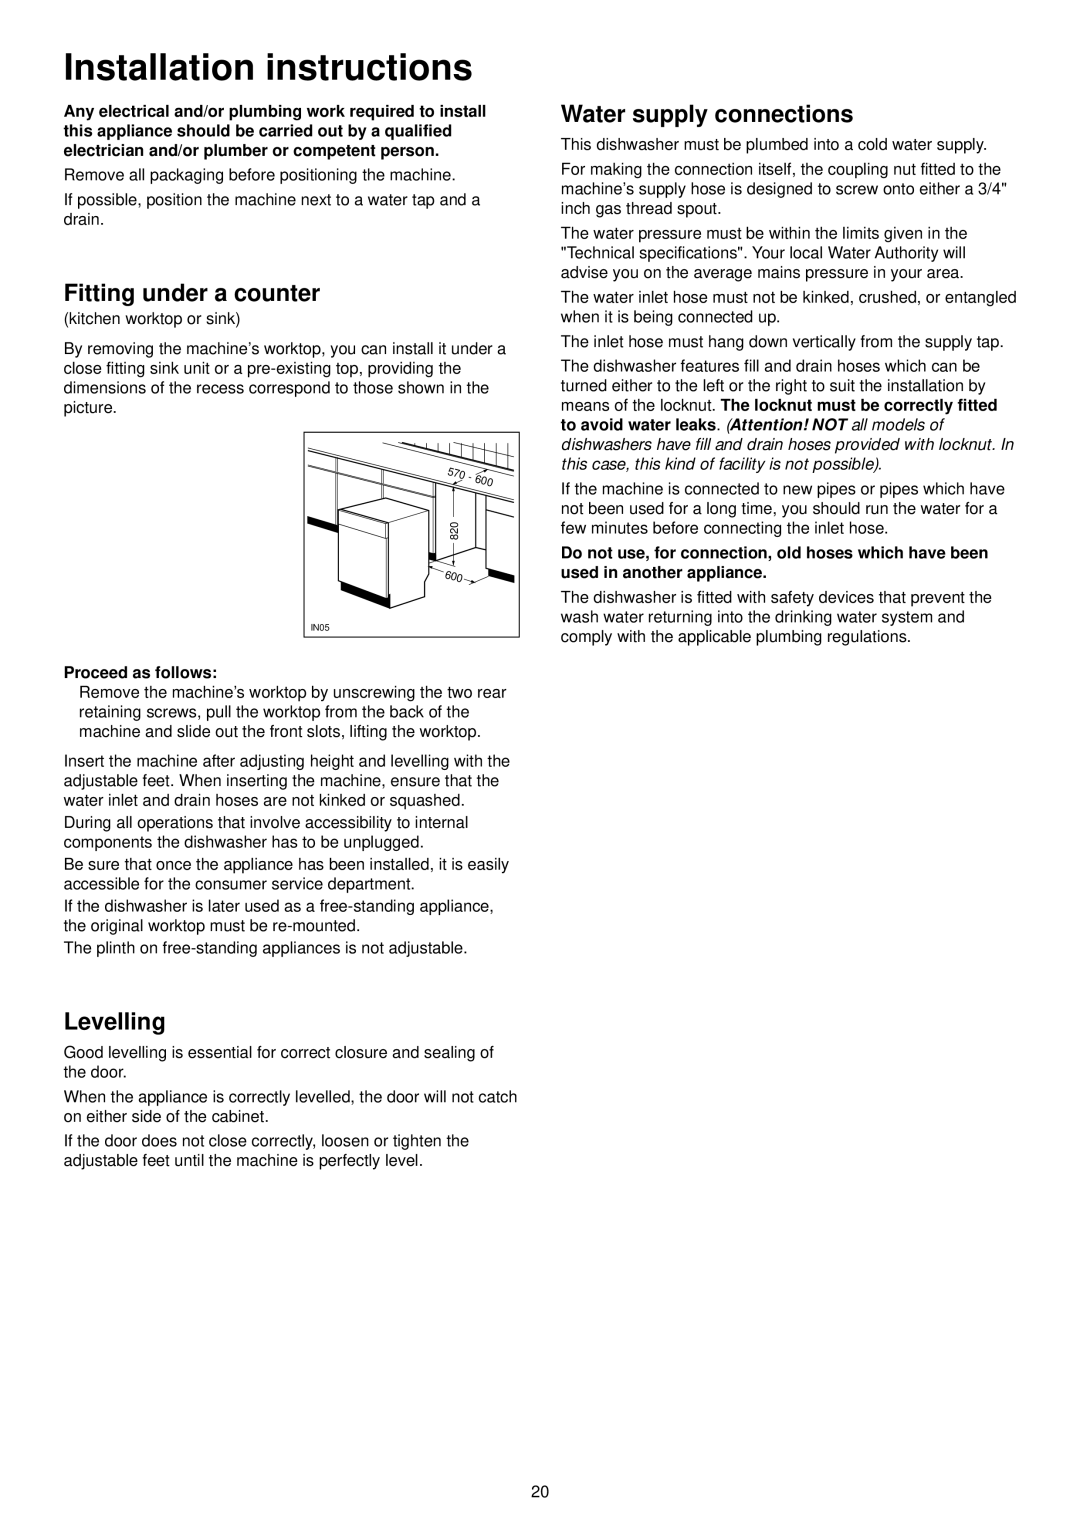 Zanussi DX 6451 manual Installation instructions, Fitting under a counter, Levelling, Water supply connections 